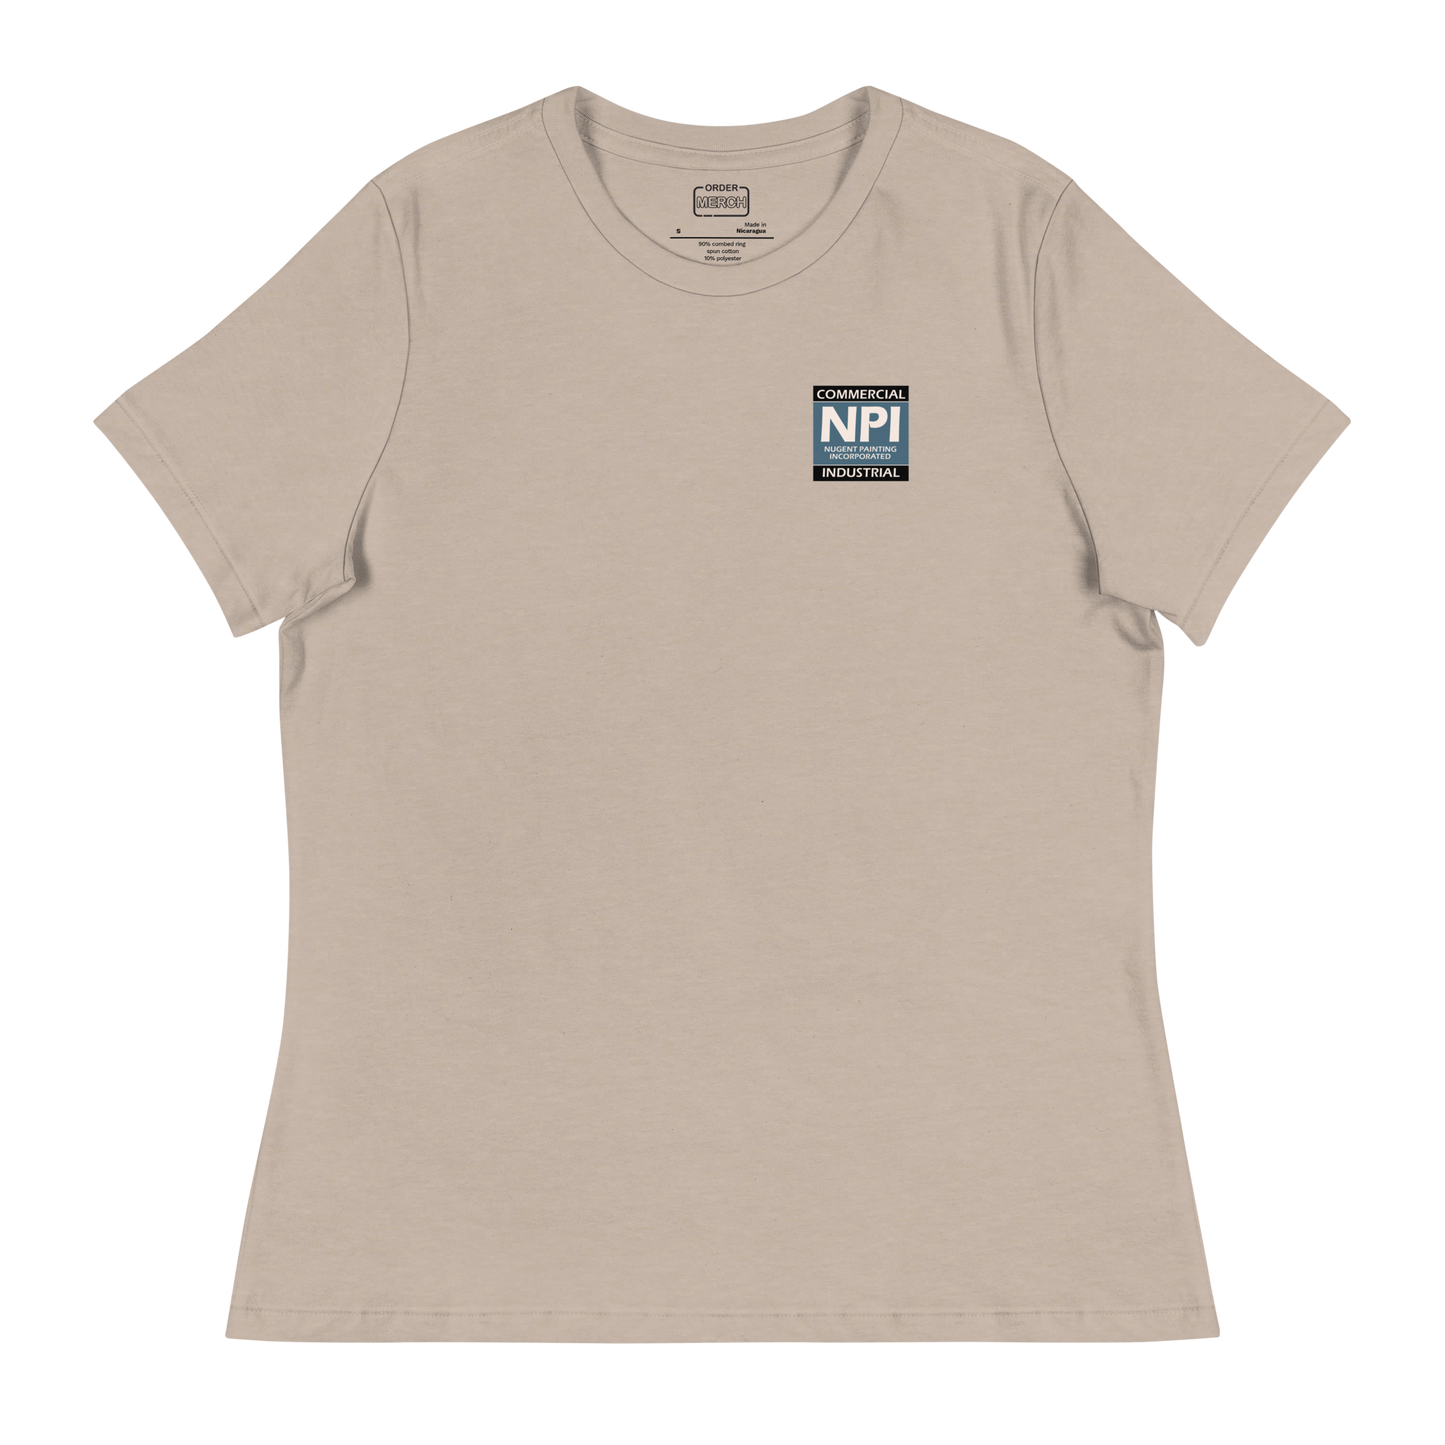 NPI STAPLE FRONT ONLY - Women's Relaxed T-Shirt